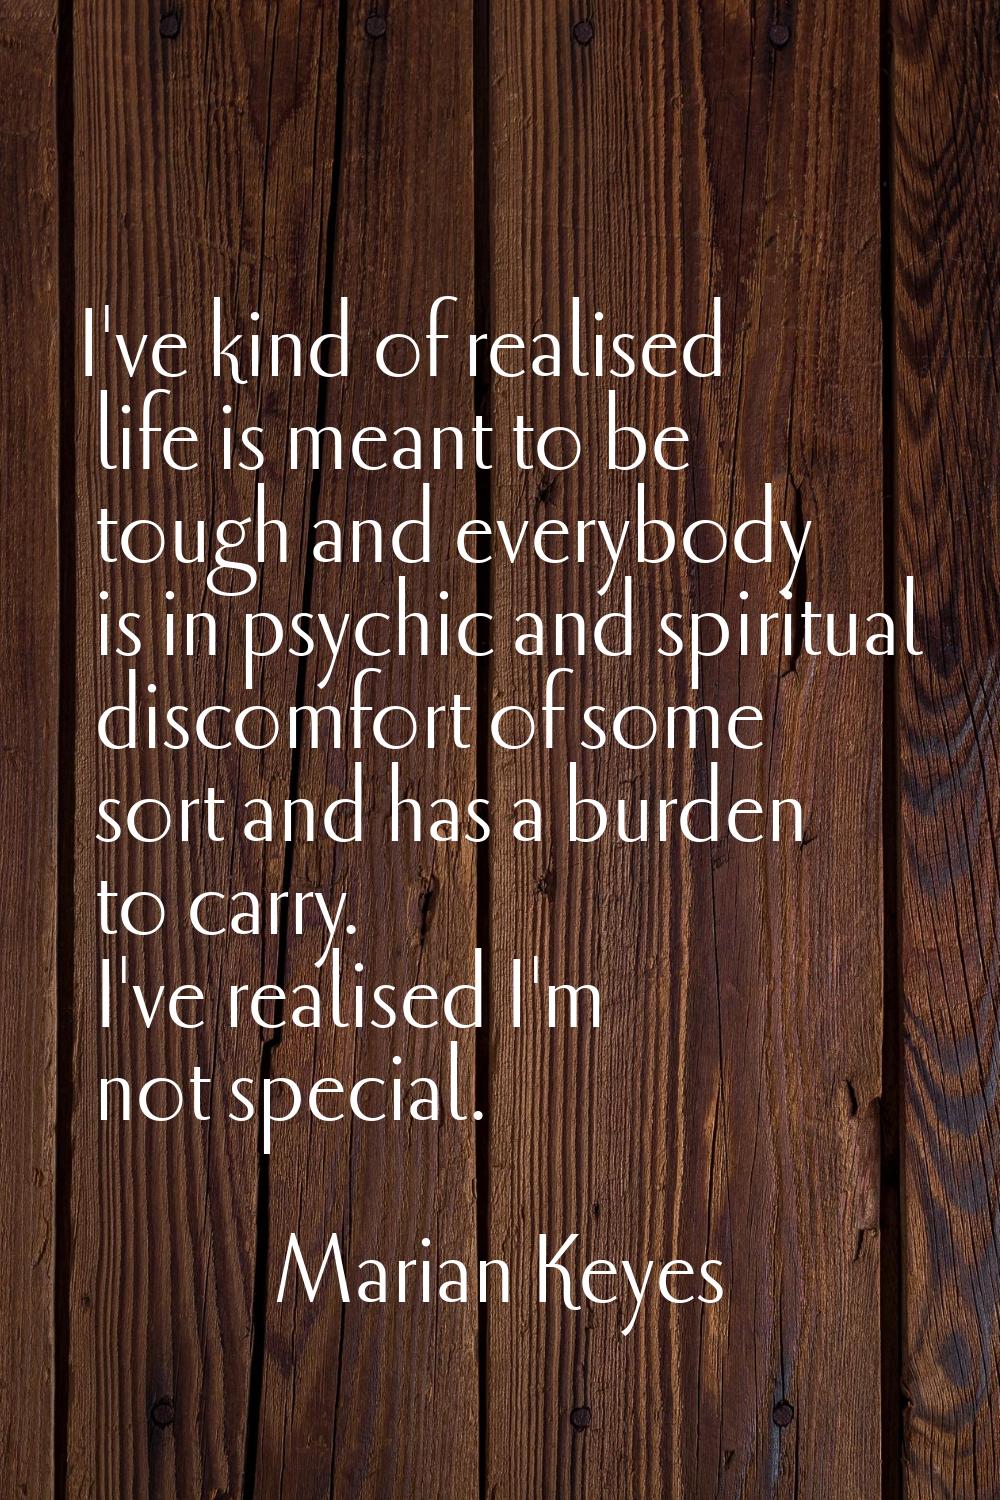 I've kind of realised life is meant to be tough and everybody is in psychic and spiritual discomfor